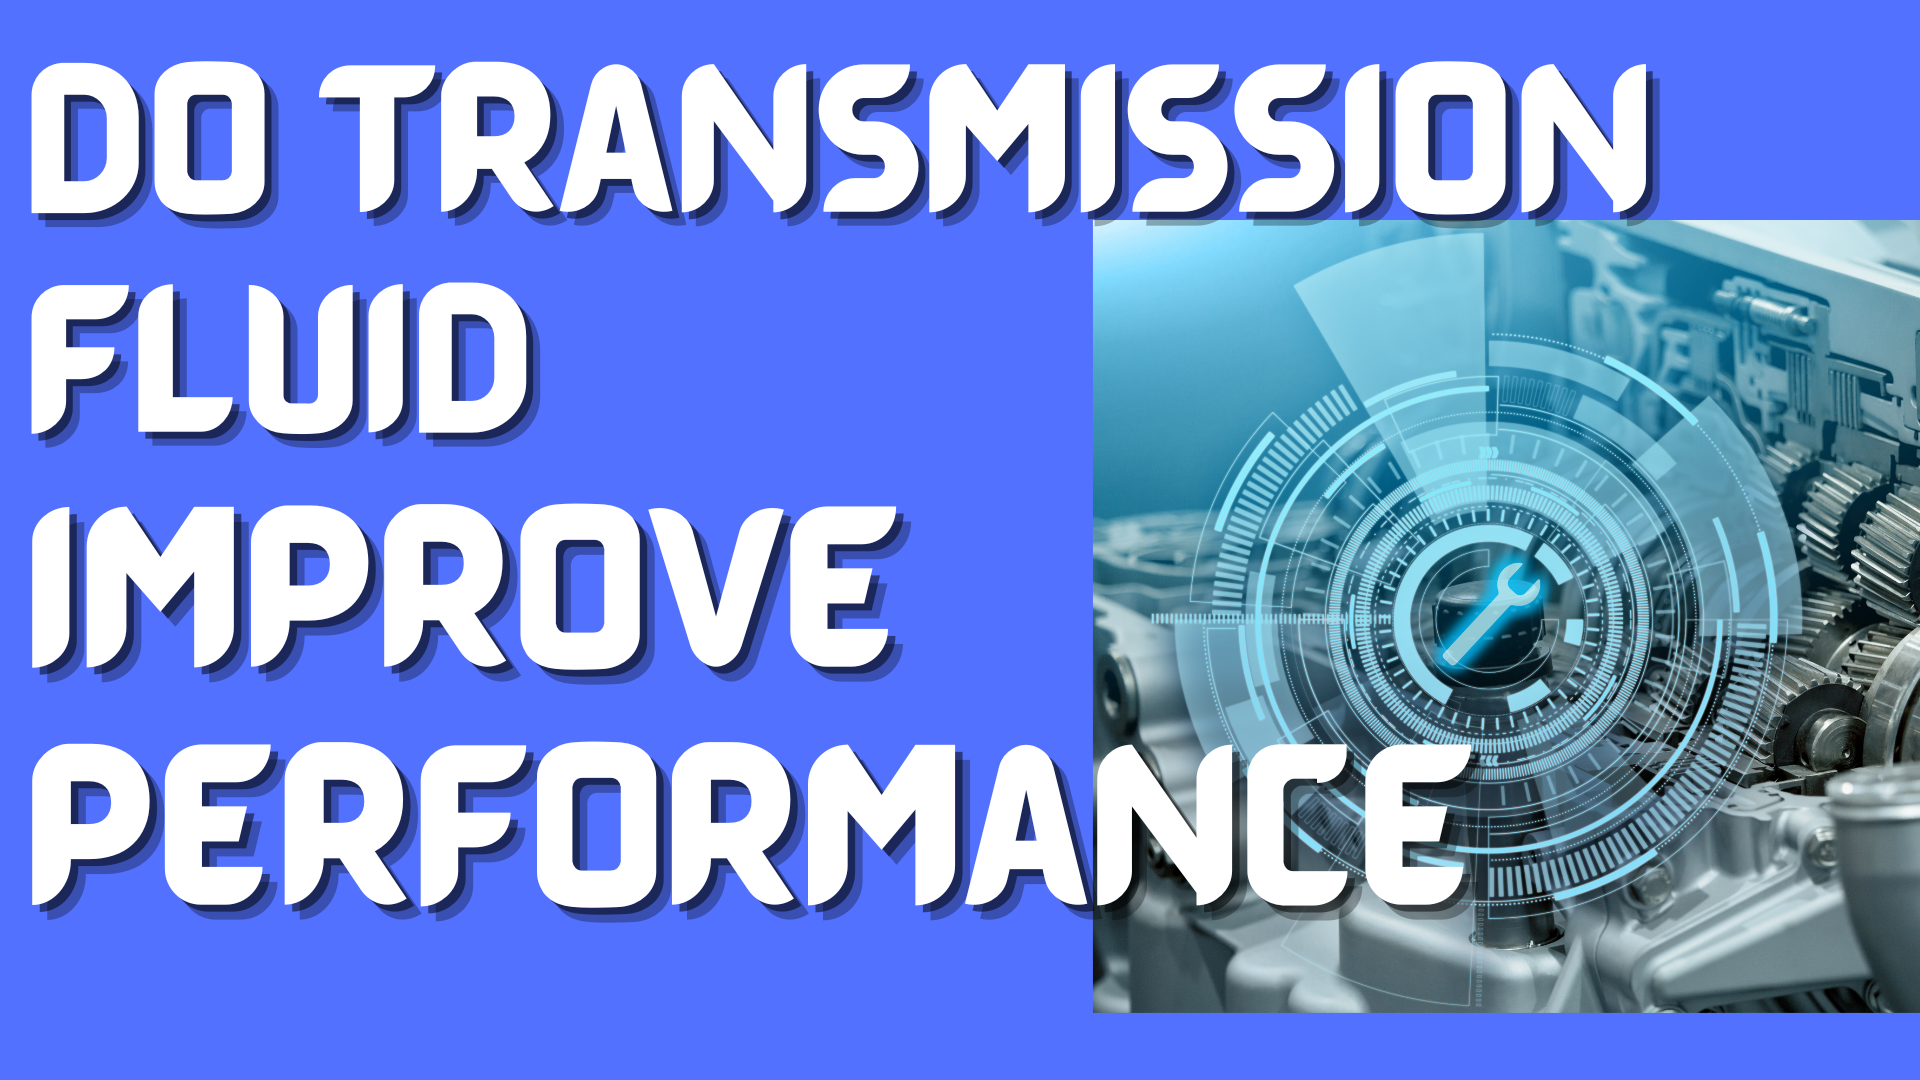 Does Changing Transmission Fluid Improve Performance?